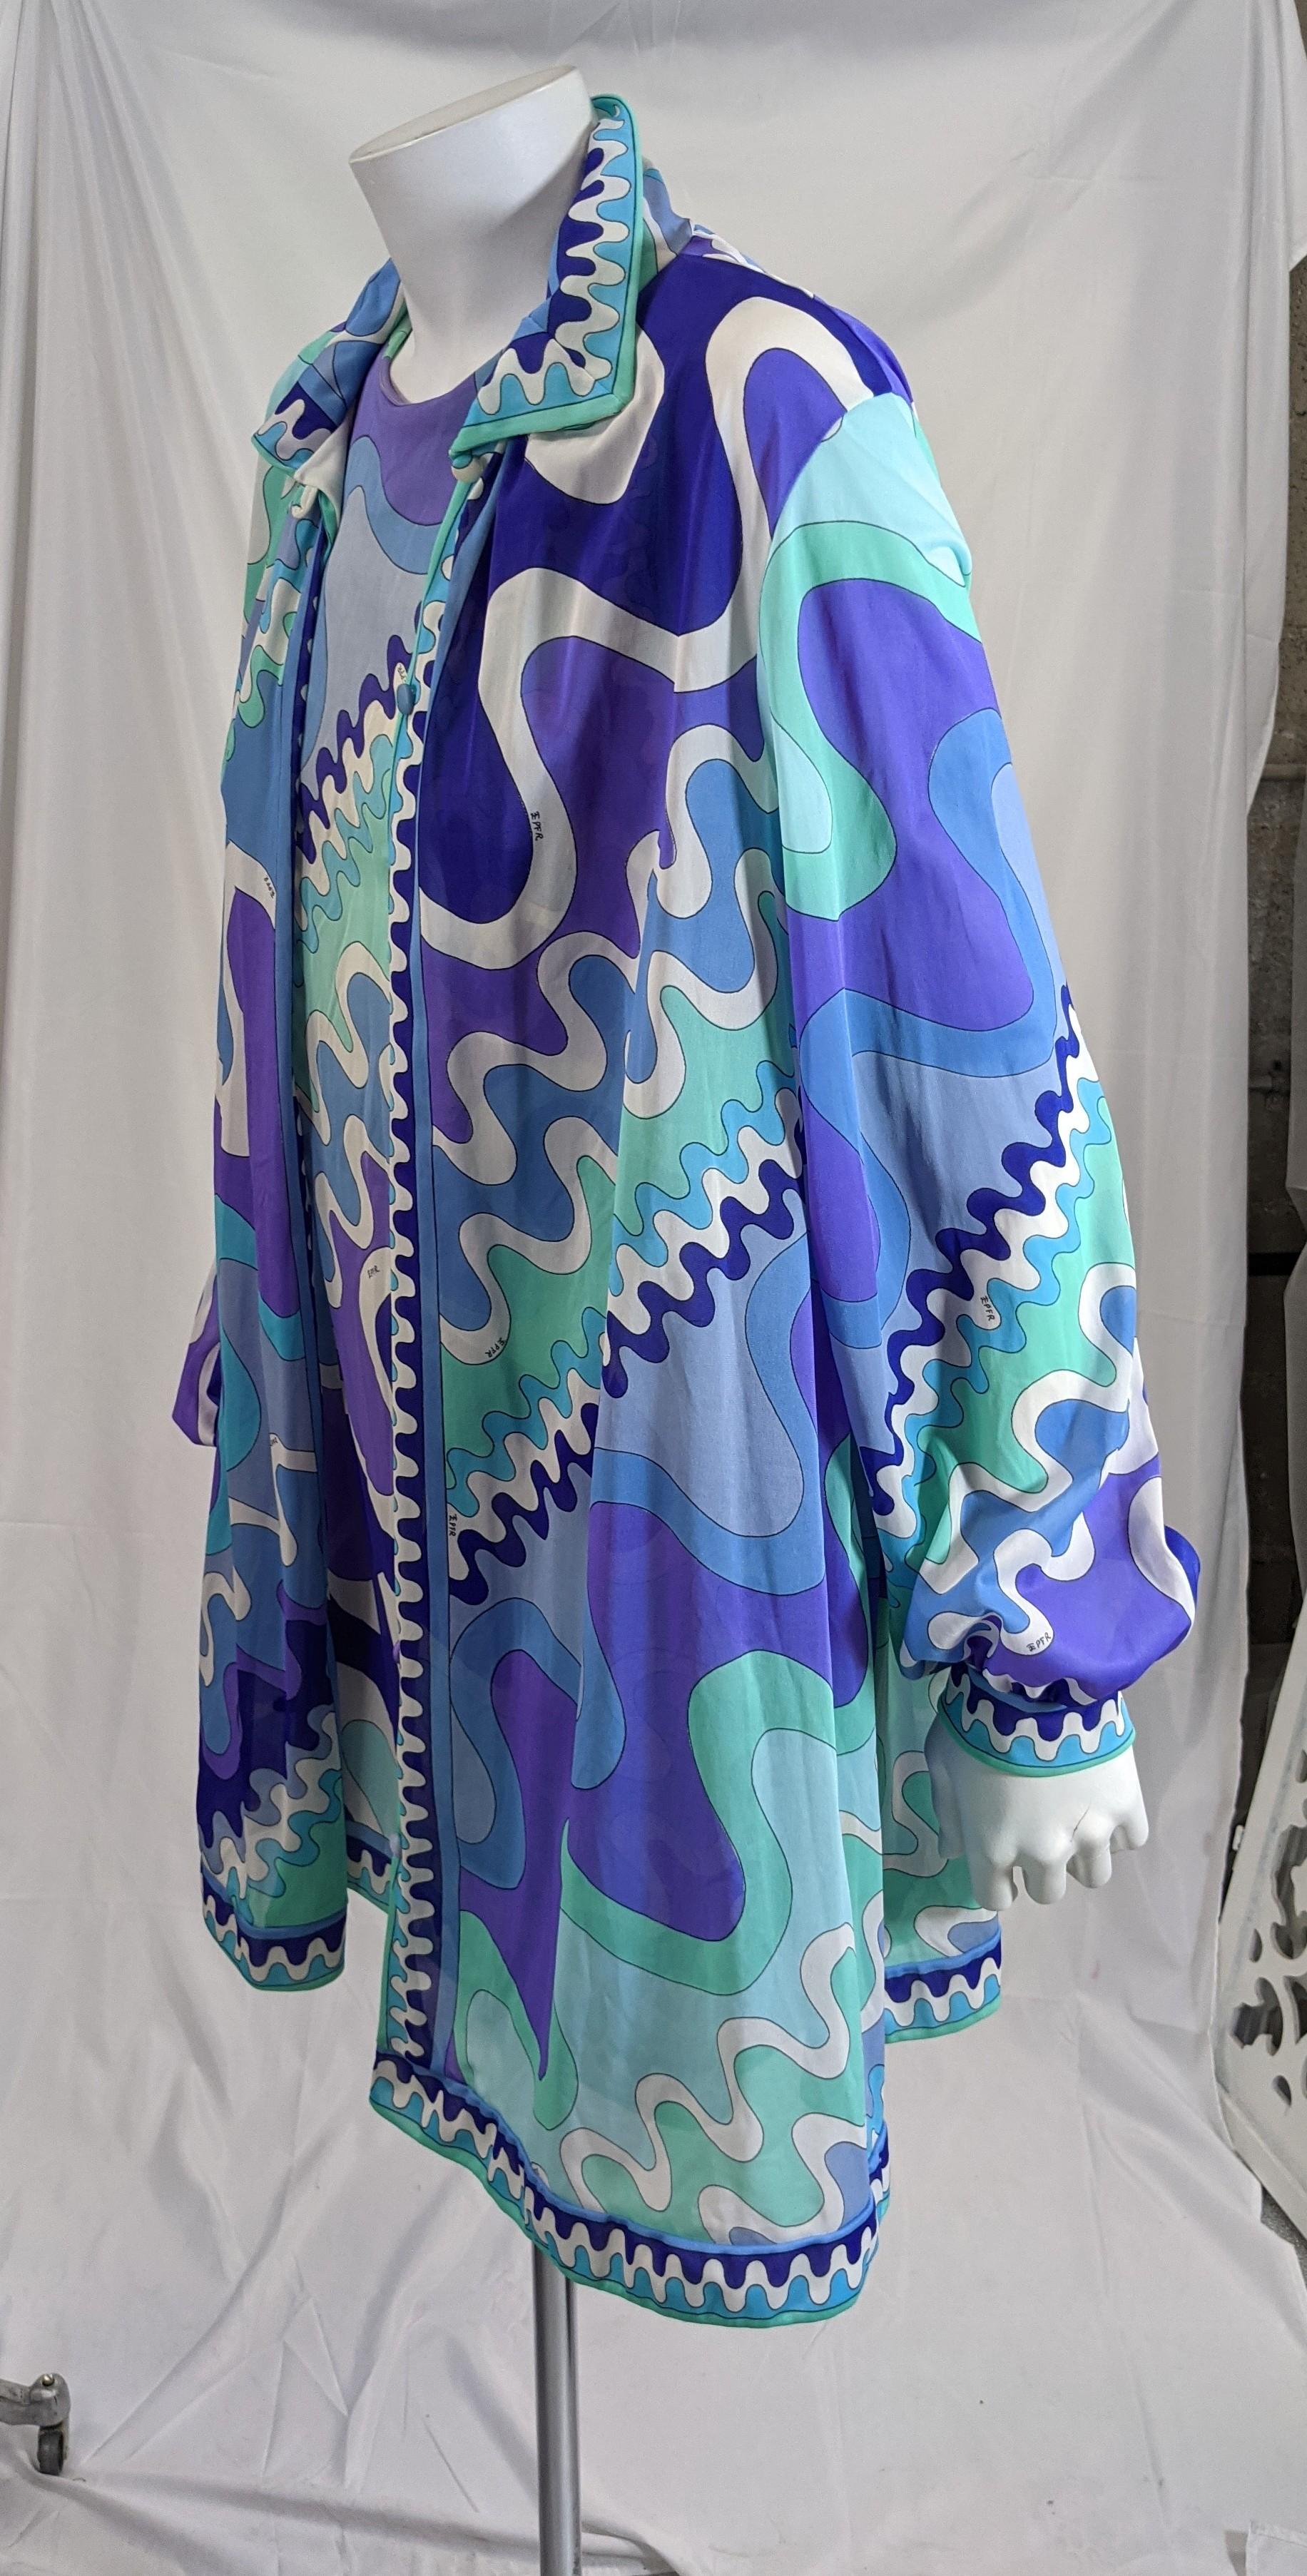 Emilio Pucci Lounge Set in printed nylon from the 1960's for Formfit Rogers. Great graphic pieces which can be worn today as outerwear which were originally designed as lingerie loungewear. 
Includes an overshirt with gathered sleeves and a mini